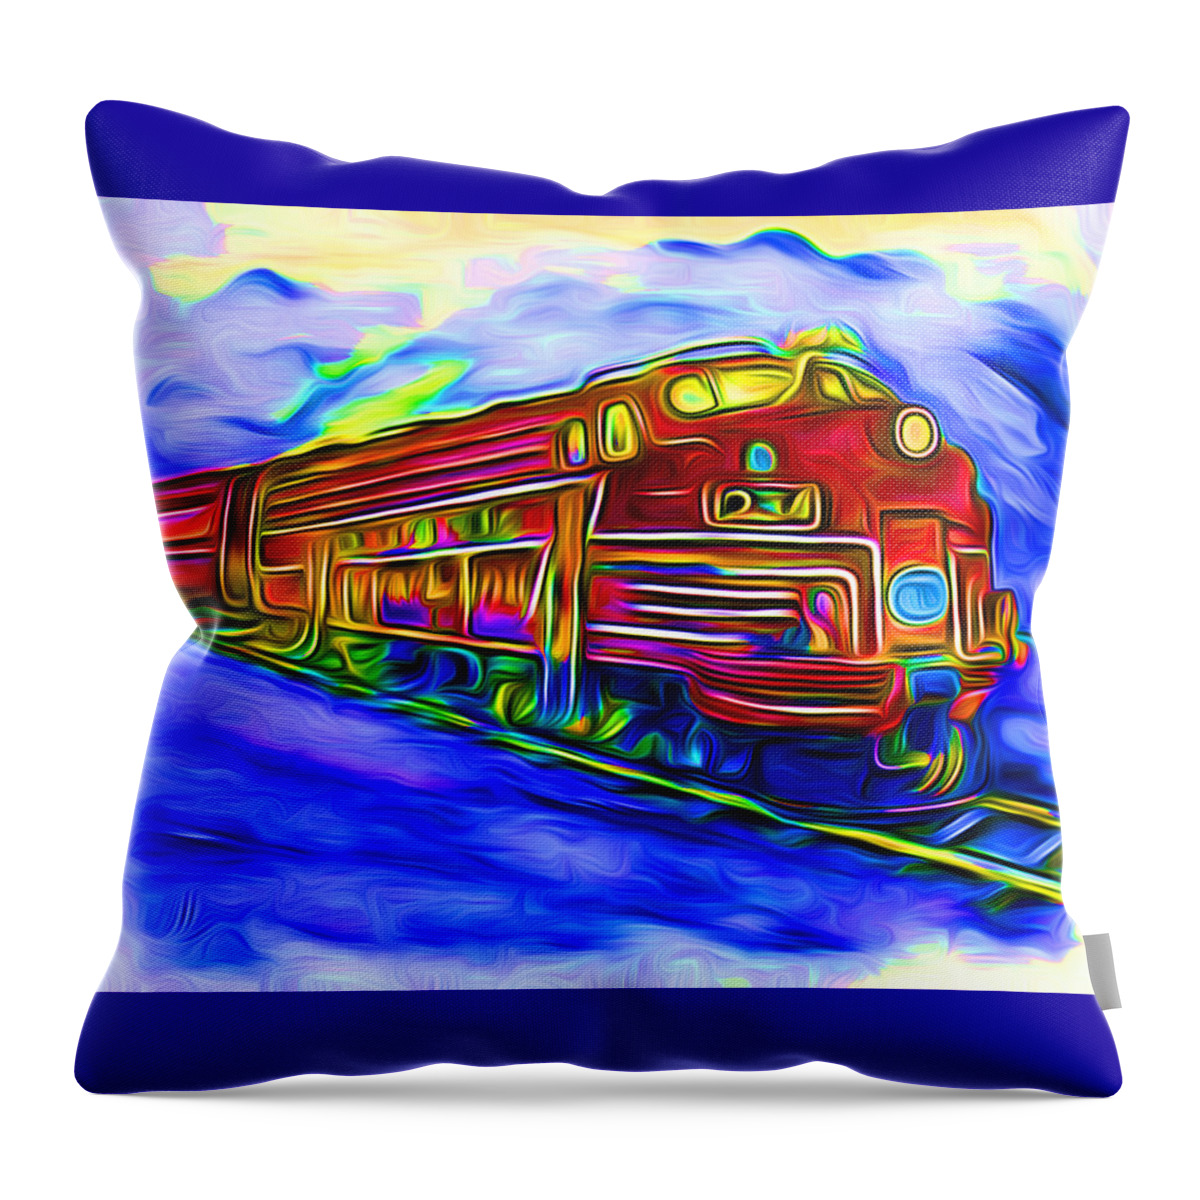 Digital Art Throw Pillow featuring the digital art Party Train by Ronald Mills